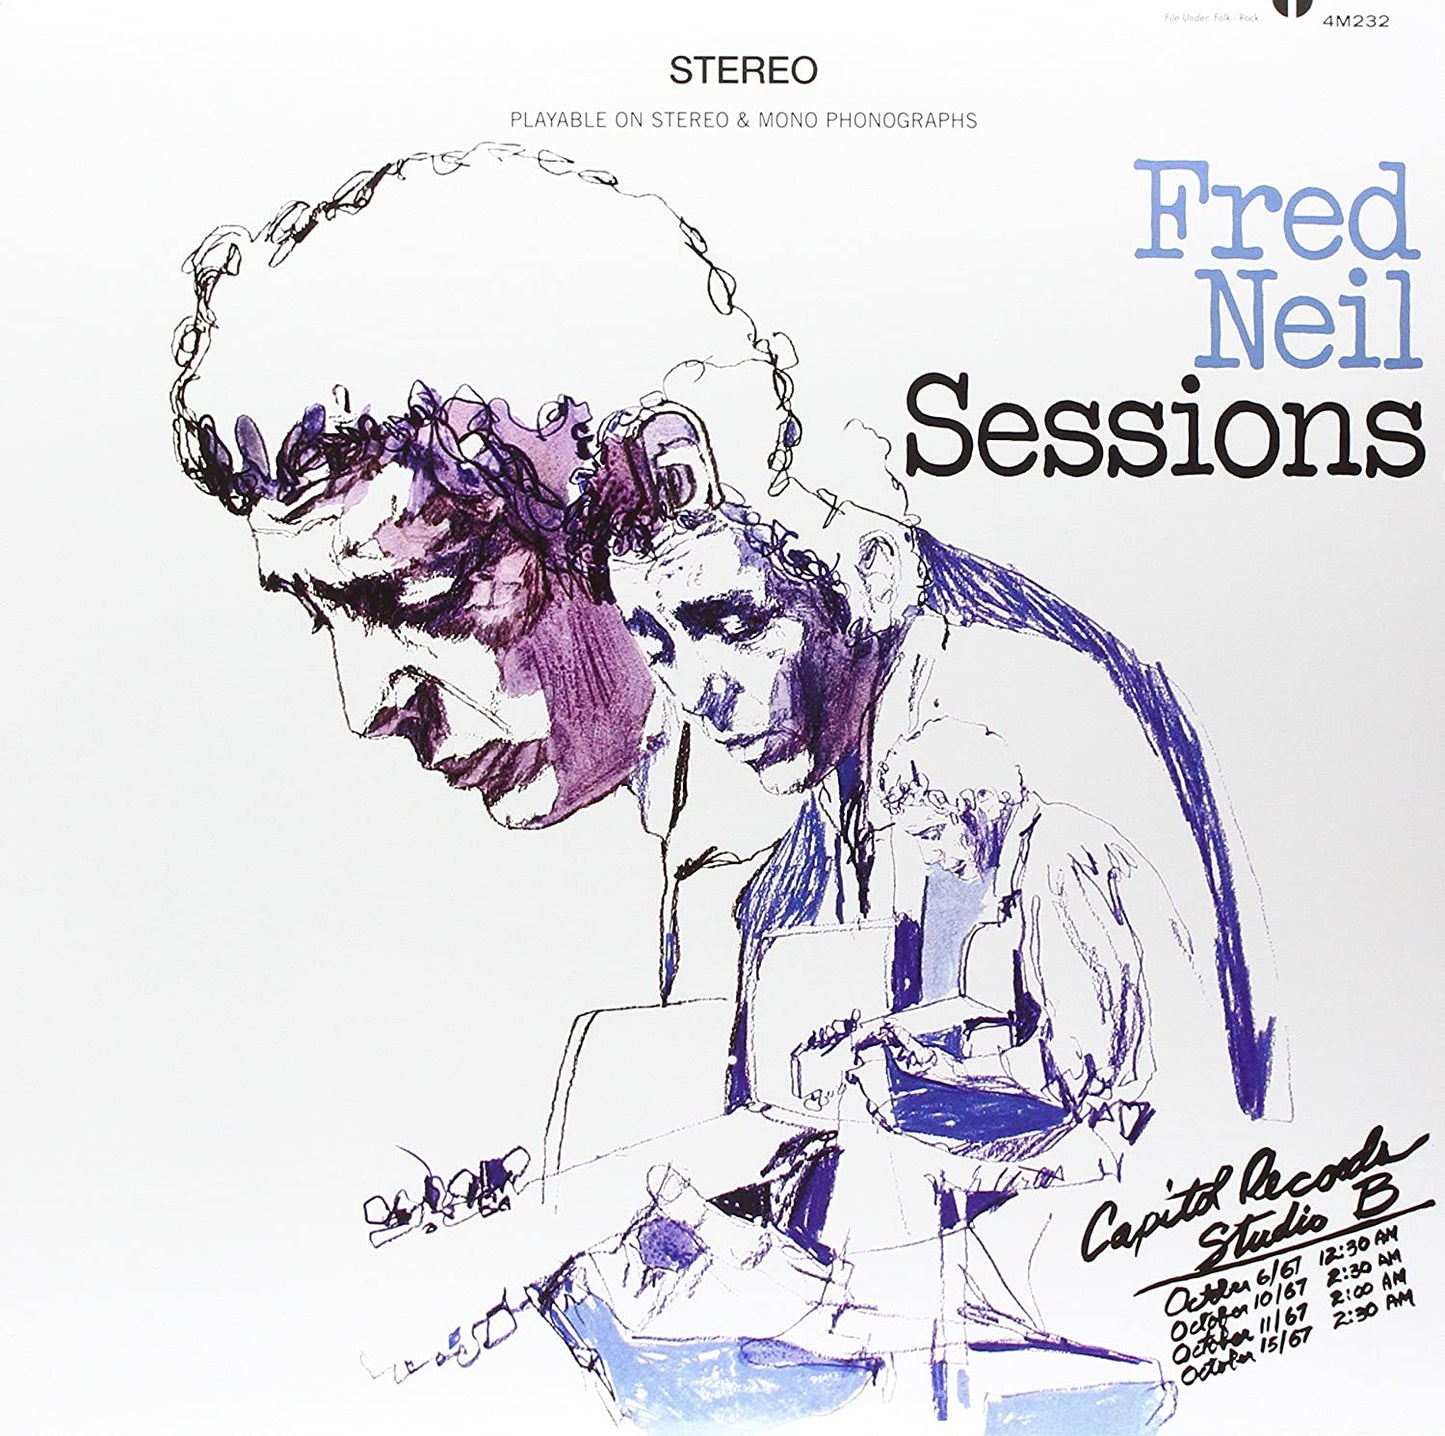 Neil, Fred/Sessions [LP]